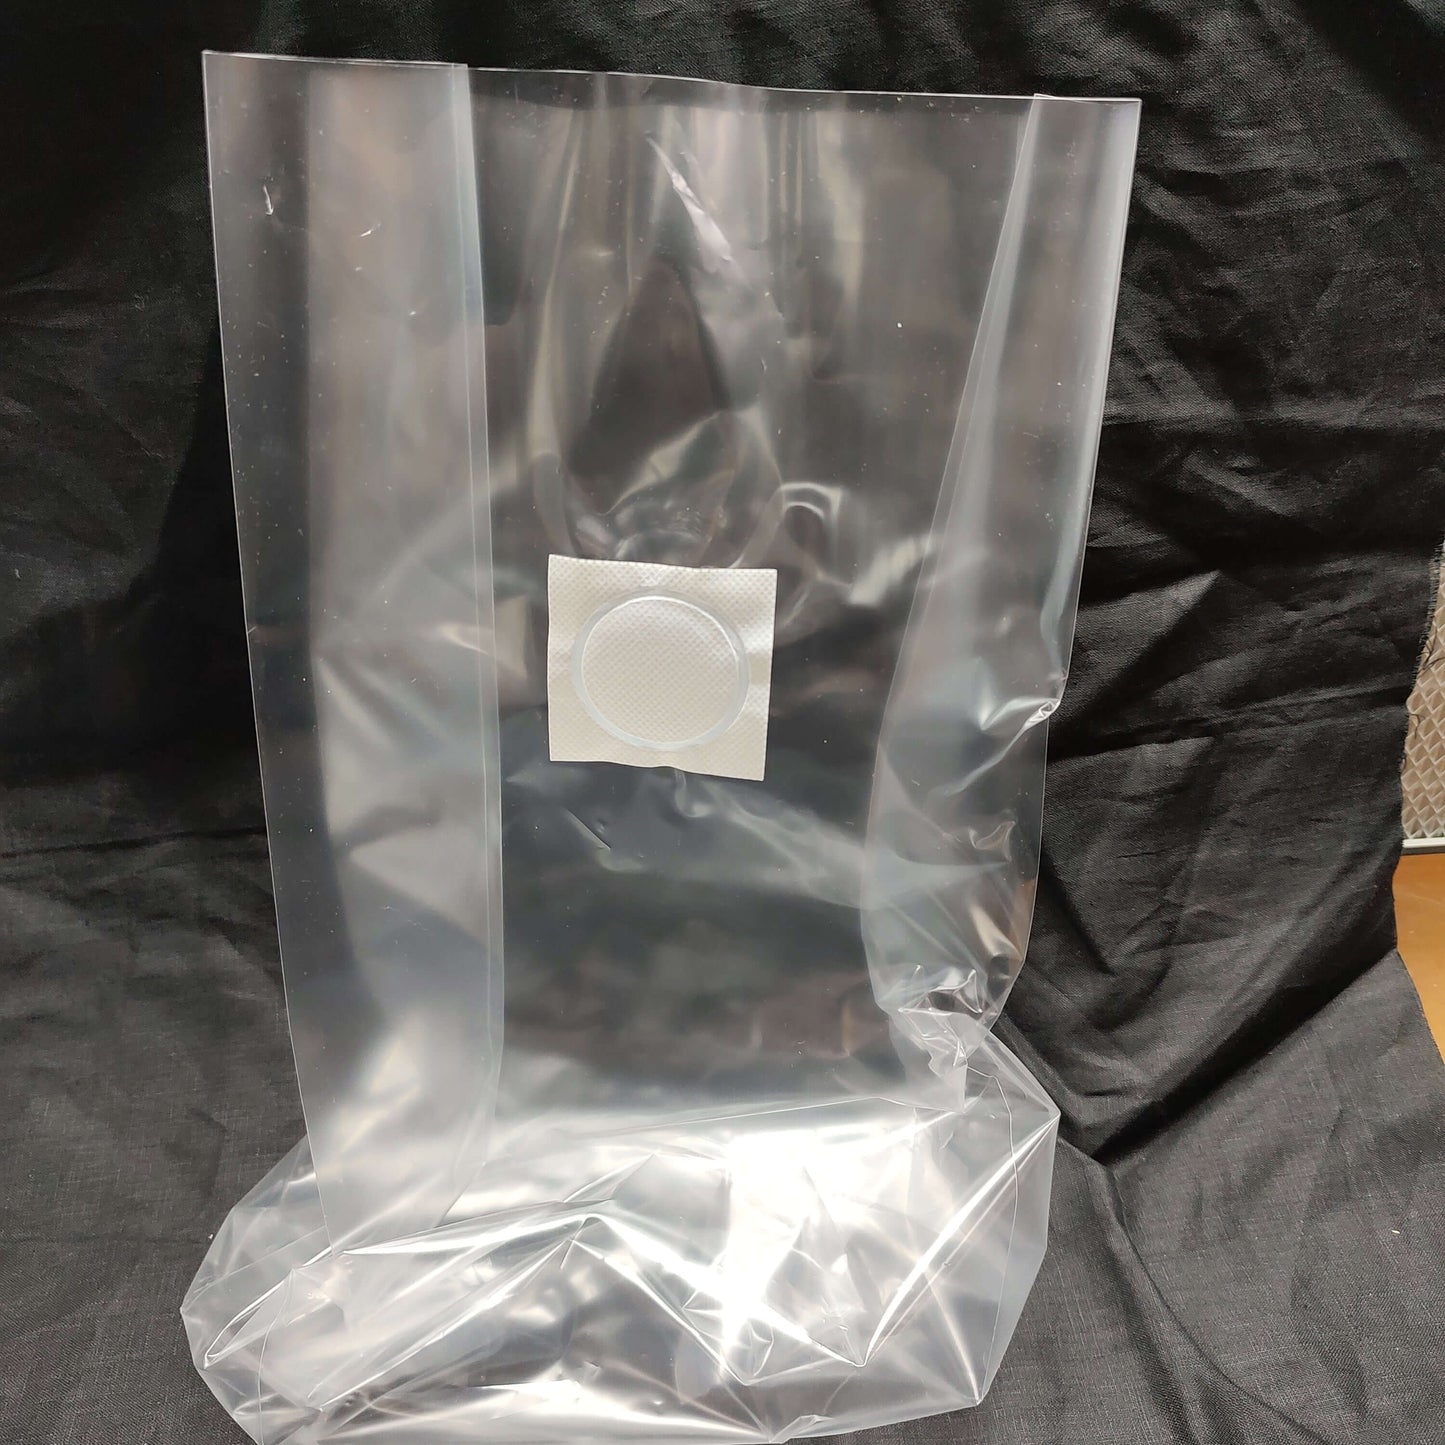 Autoclavable filter grow bags